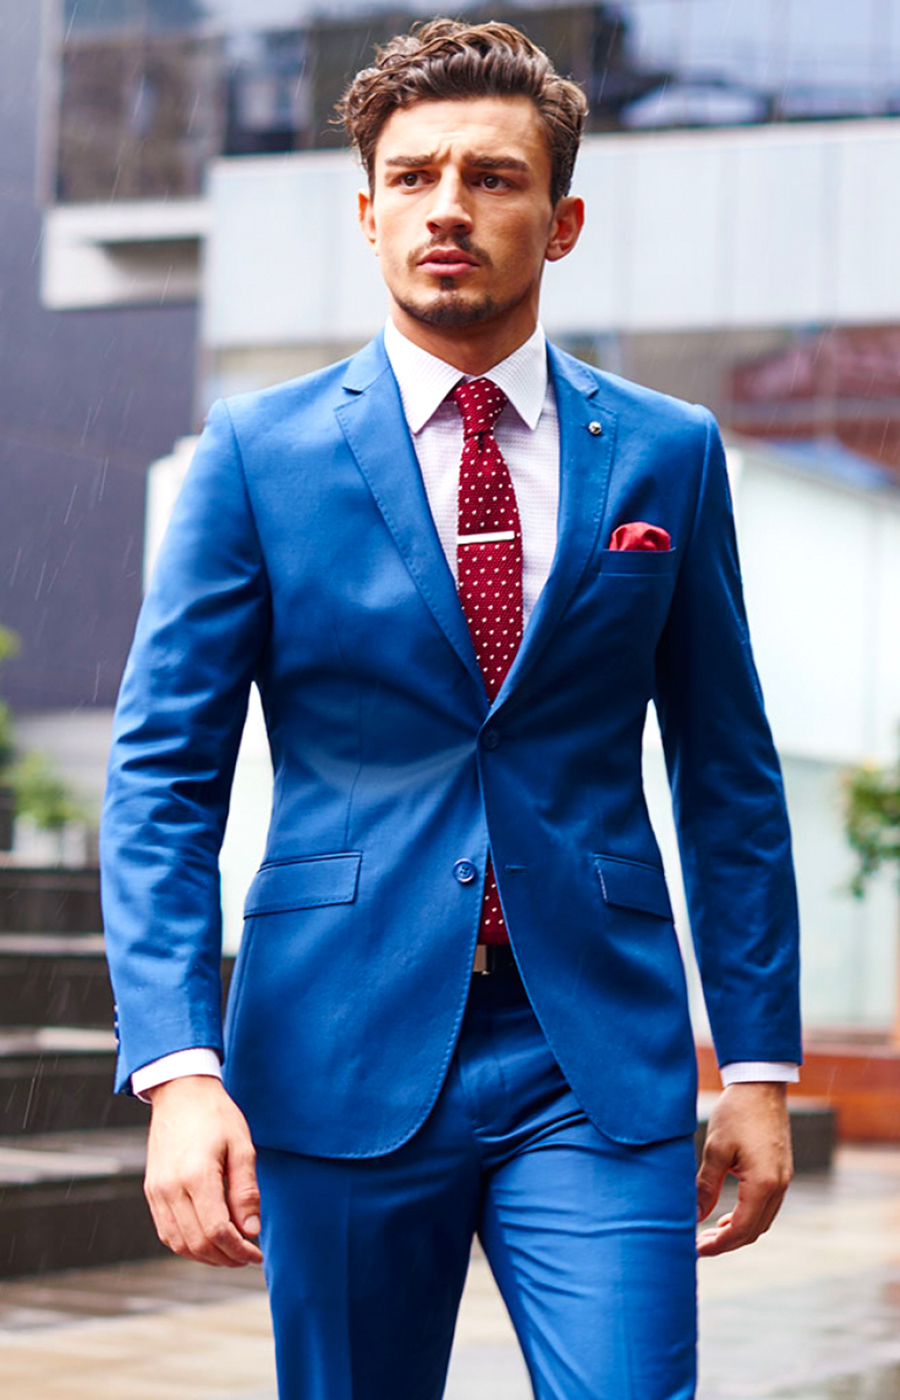 How To Match Shirt And Tie Properly Suits Expert